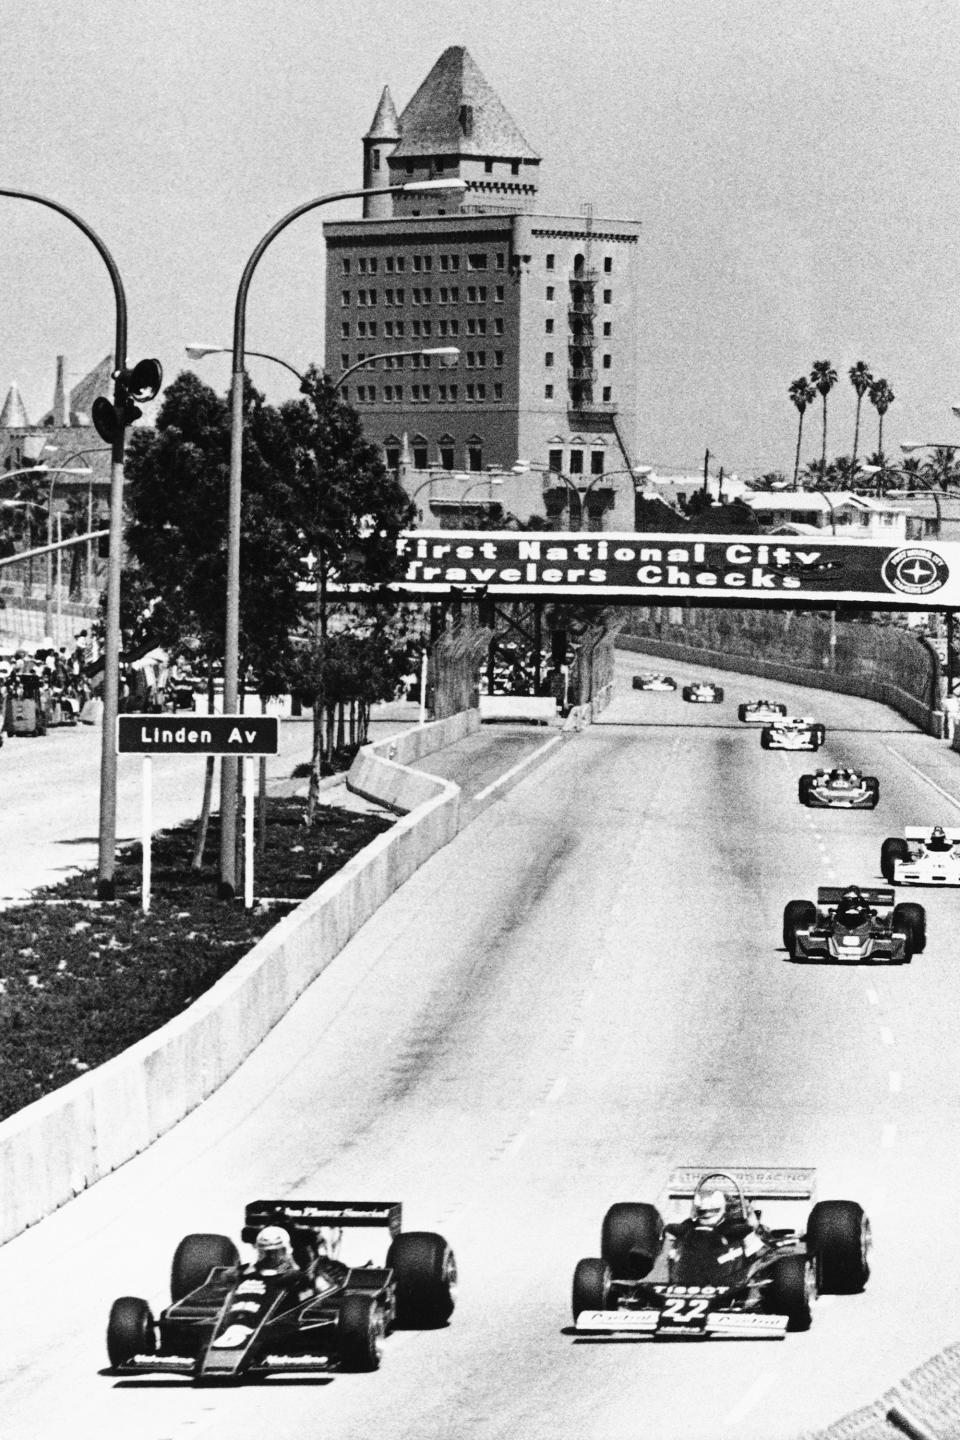 FILE - Formula One drivers Mario Andretti, left, and Clay Regazzoni of Switzerland lead the field through the streets of Long Beach, Calif., during the early laps of the Long Beach Grand Prix, in this April, 3, 1977, file photo. The Grand Prix of Long Beach opens 17 months after the pandemic ended the crown jewel's streak as one of the longest continuously-running street events in racing. The city closed its downtown streets for the first time in 1975 to host a street race that became one of the most prestigious events in both motorsports but also for successful, annual festivals (AP Photo/File)